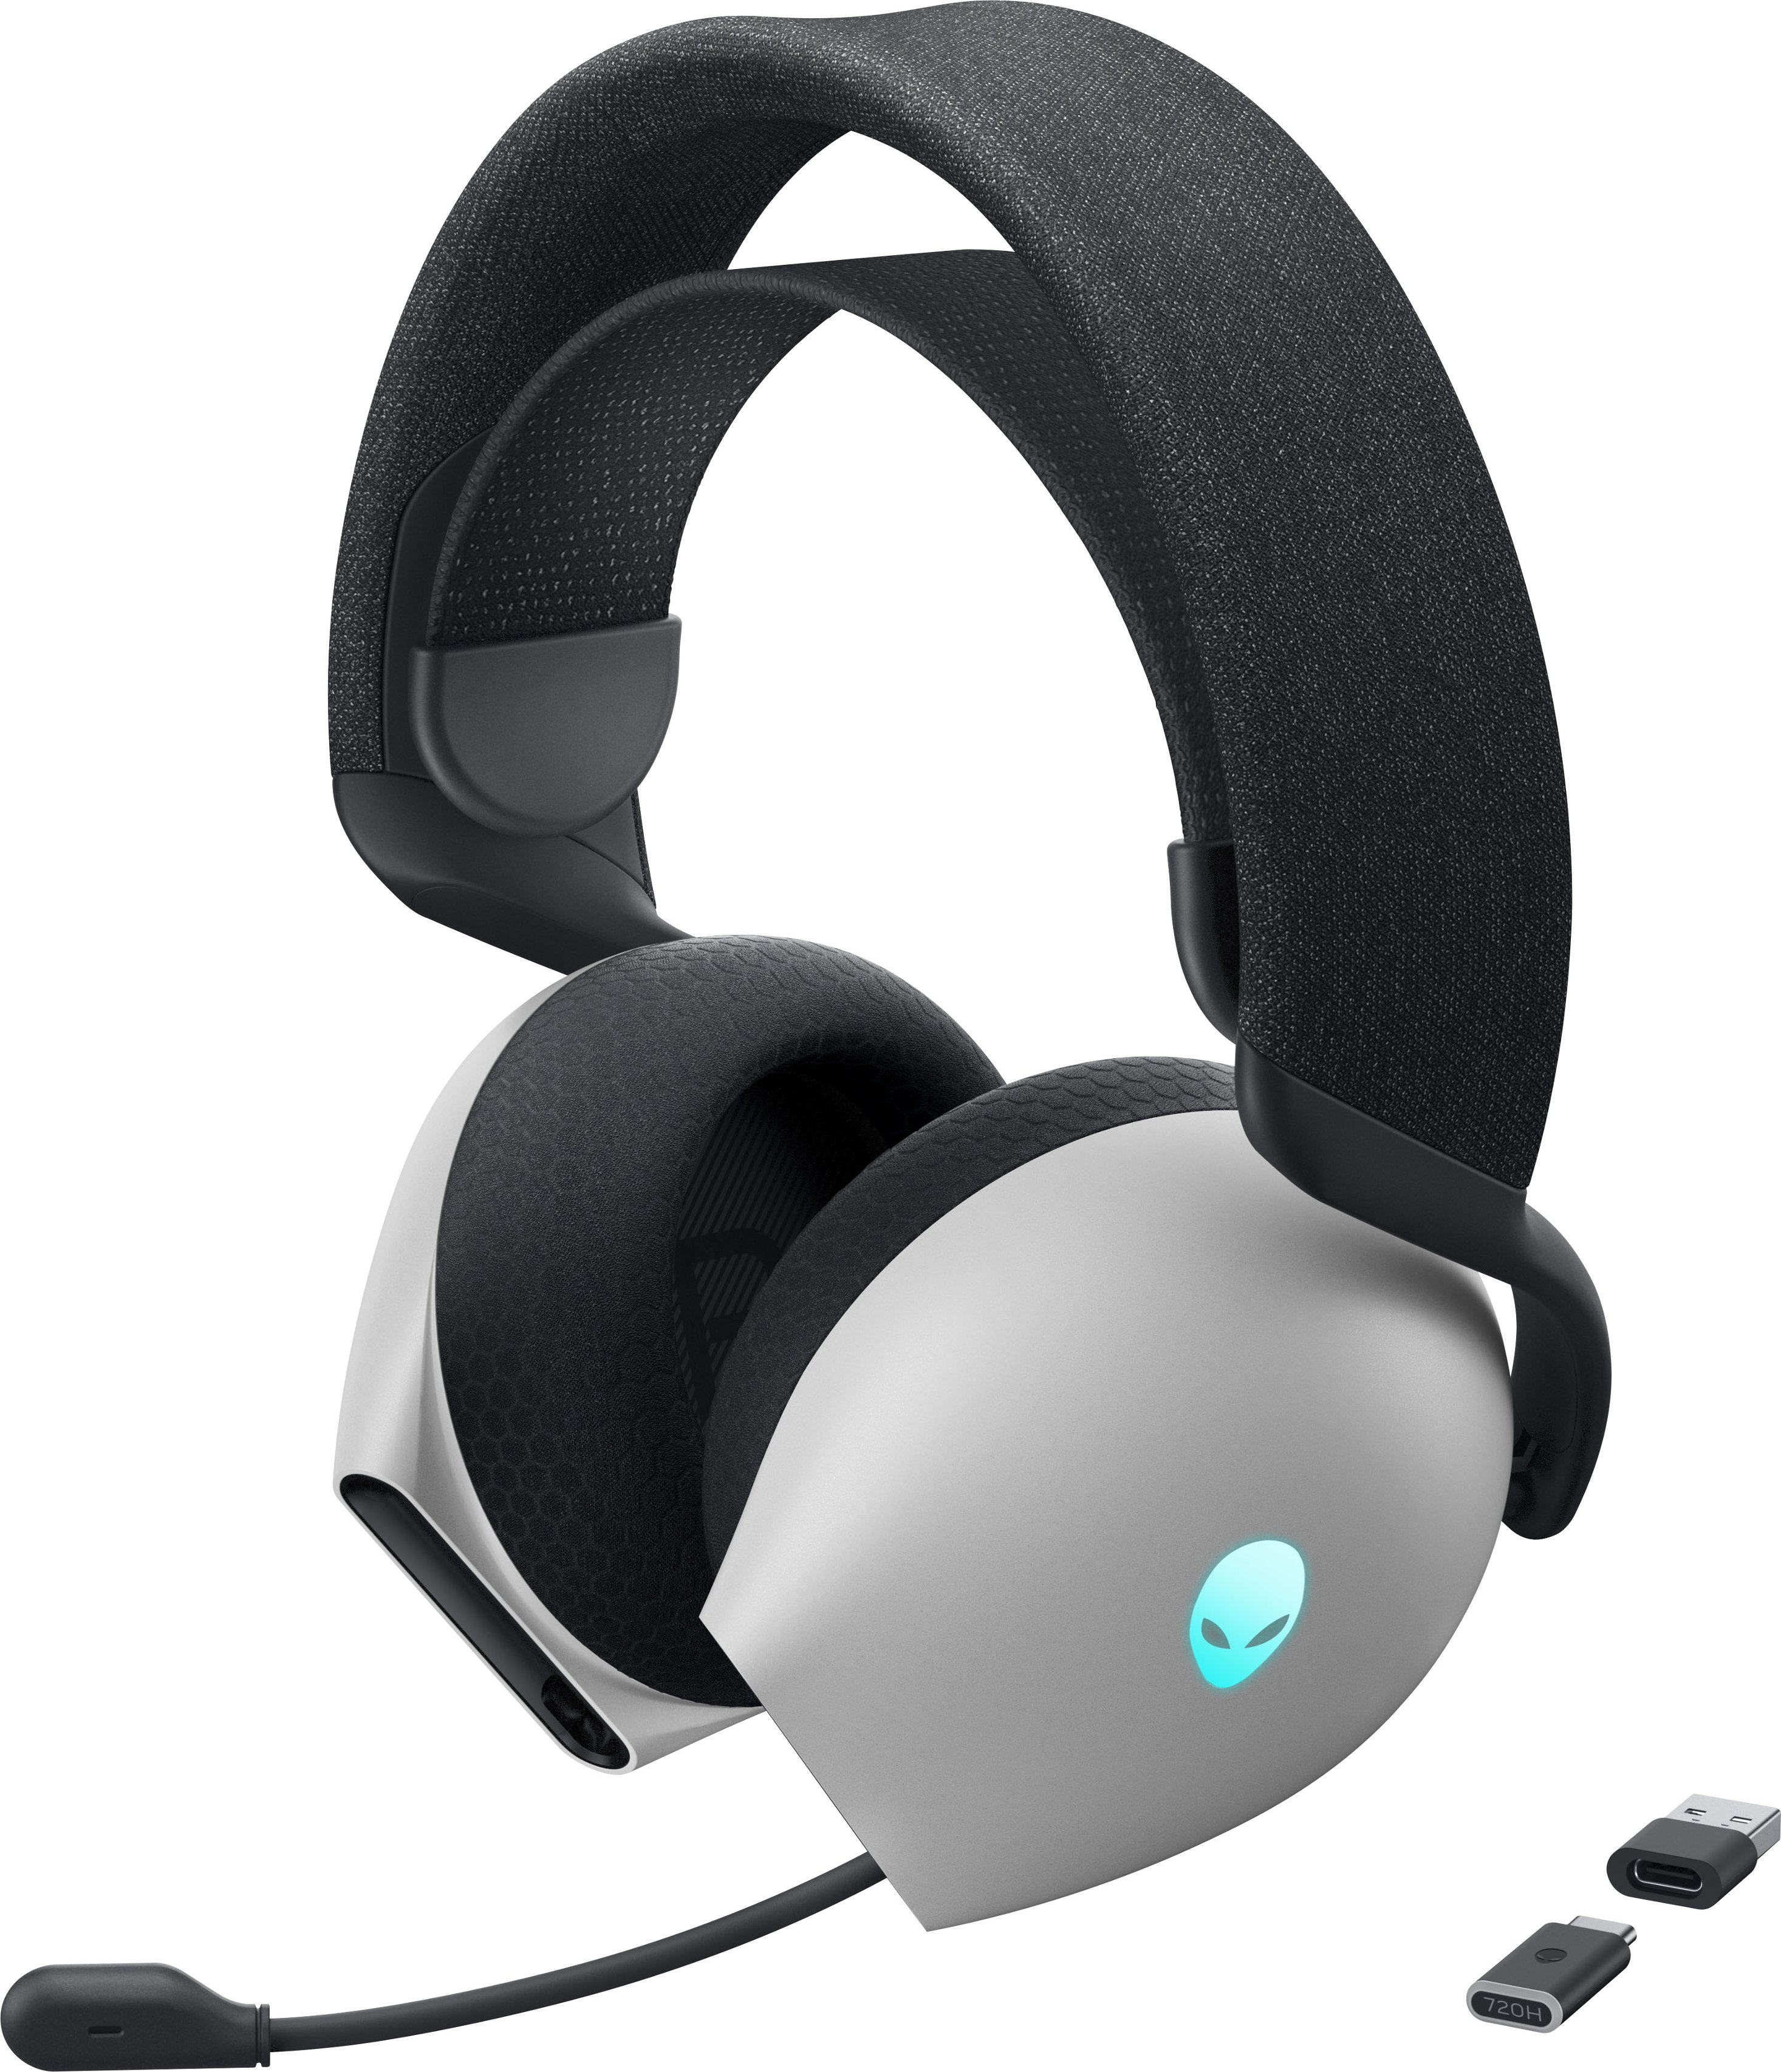 Angle View: Alienware - Dual Mode Wireless Gaming Headset - AW720H - Lunar Light